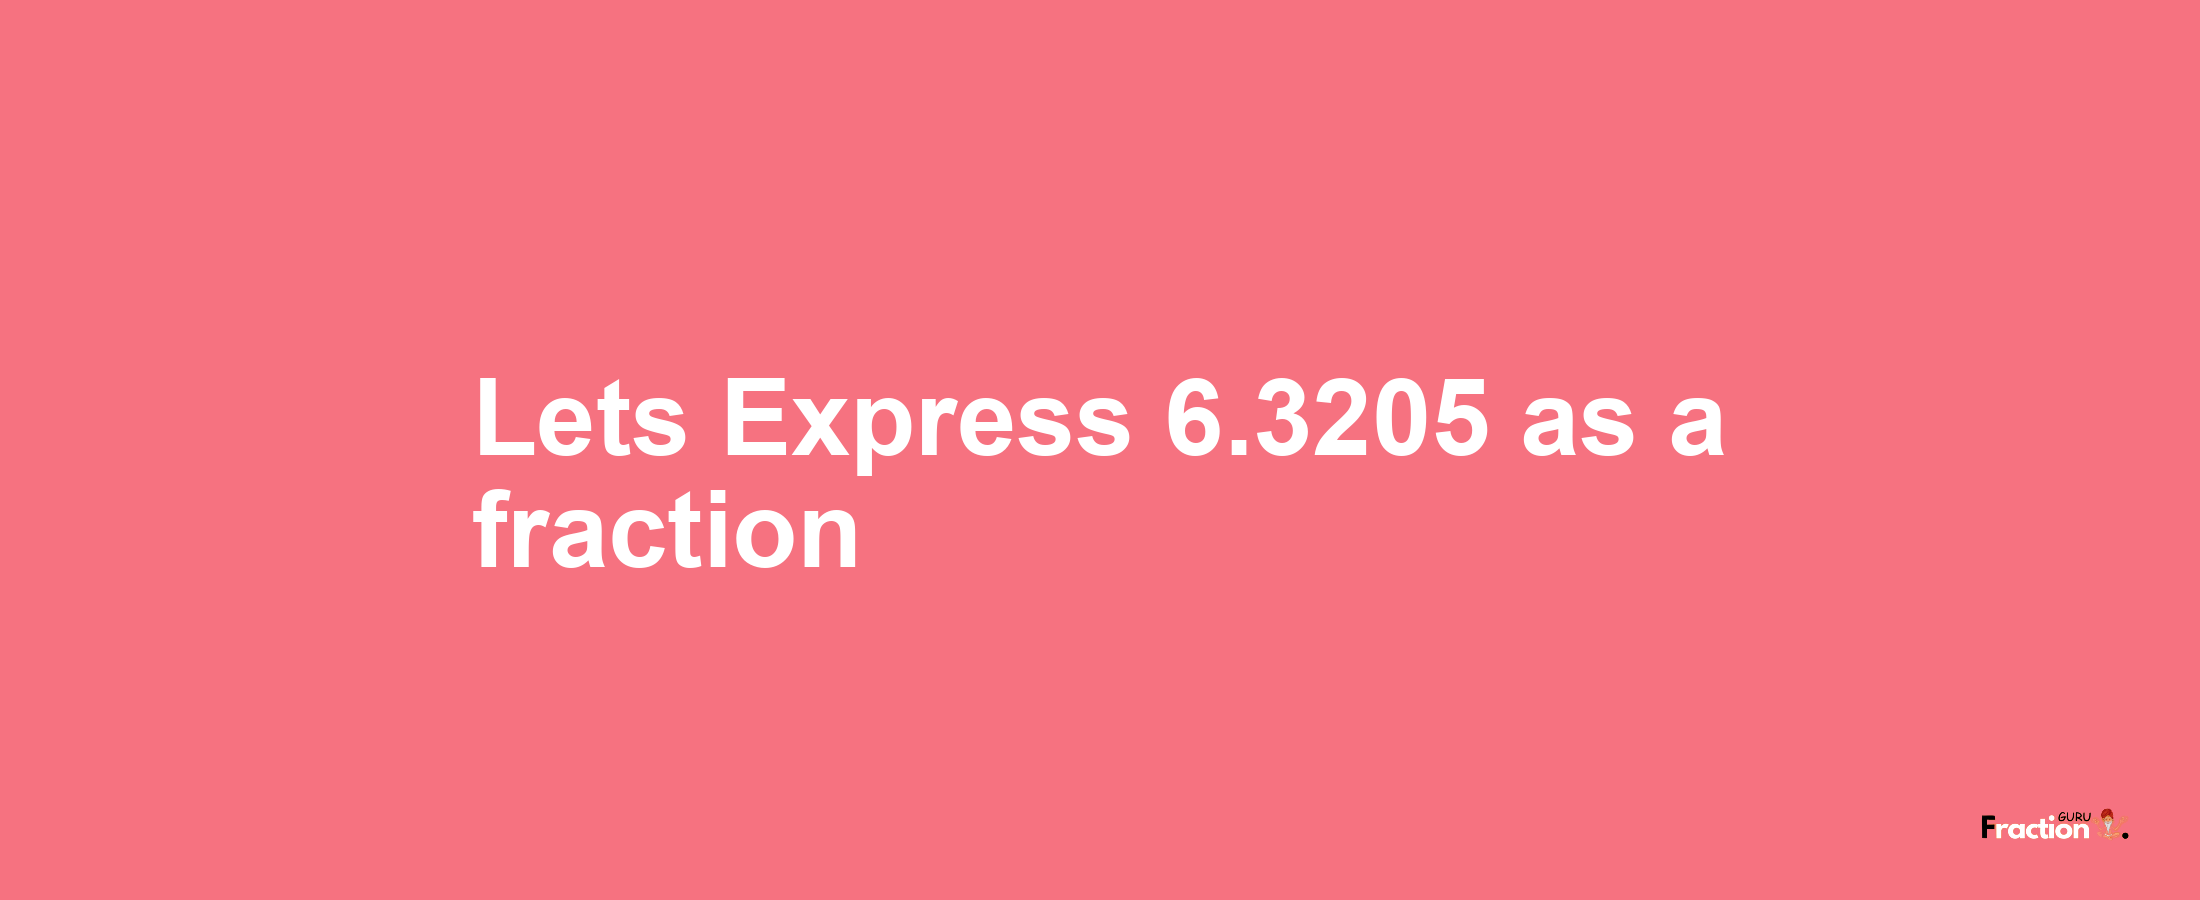 Lets Express 6.3205 as afraction